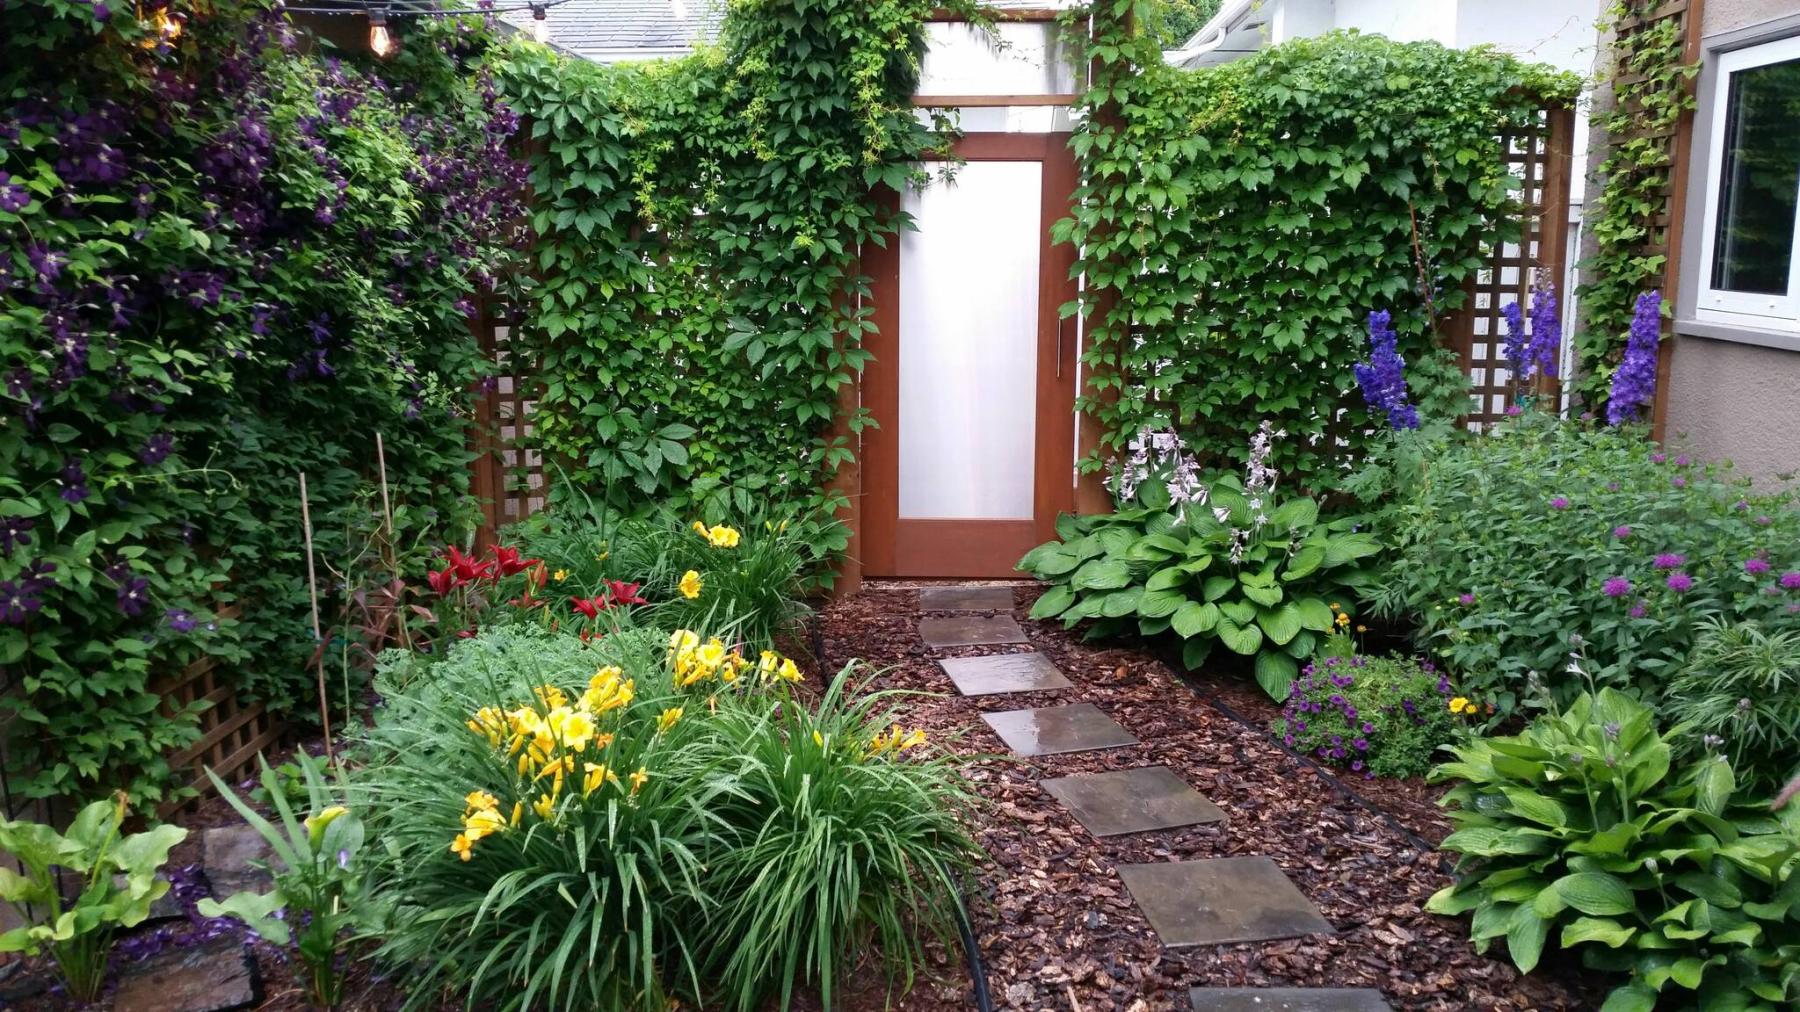  <p>Erroll billinkoff</p>
                                <p>This jewel of a garden is enhanced by Clematis Jackmanii vines growing on a trellis on the outer wall of the homeowner&rsquo;s garage.</p> 